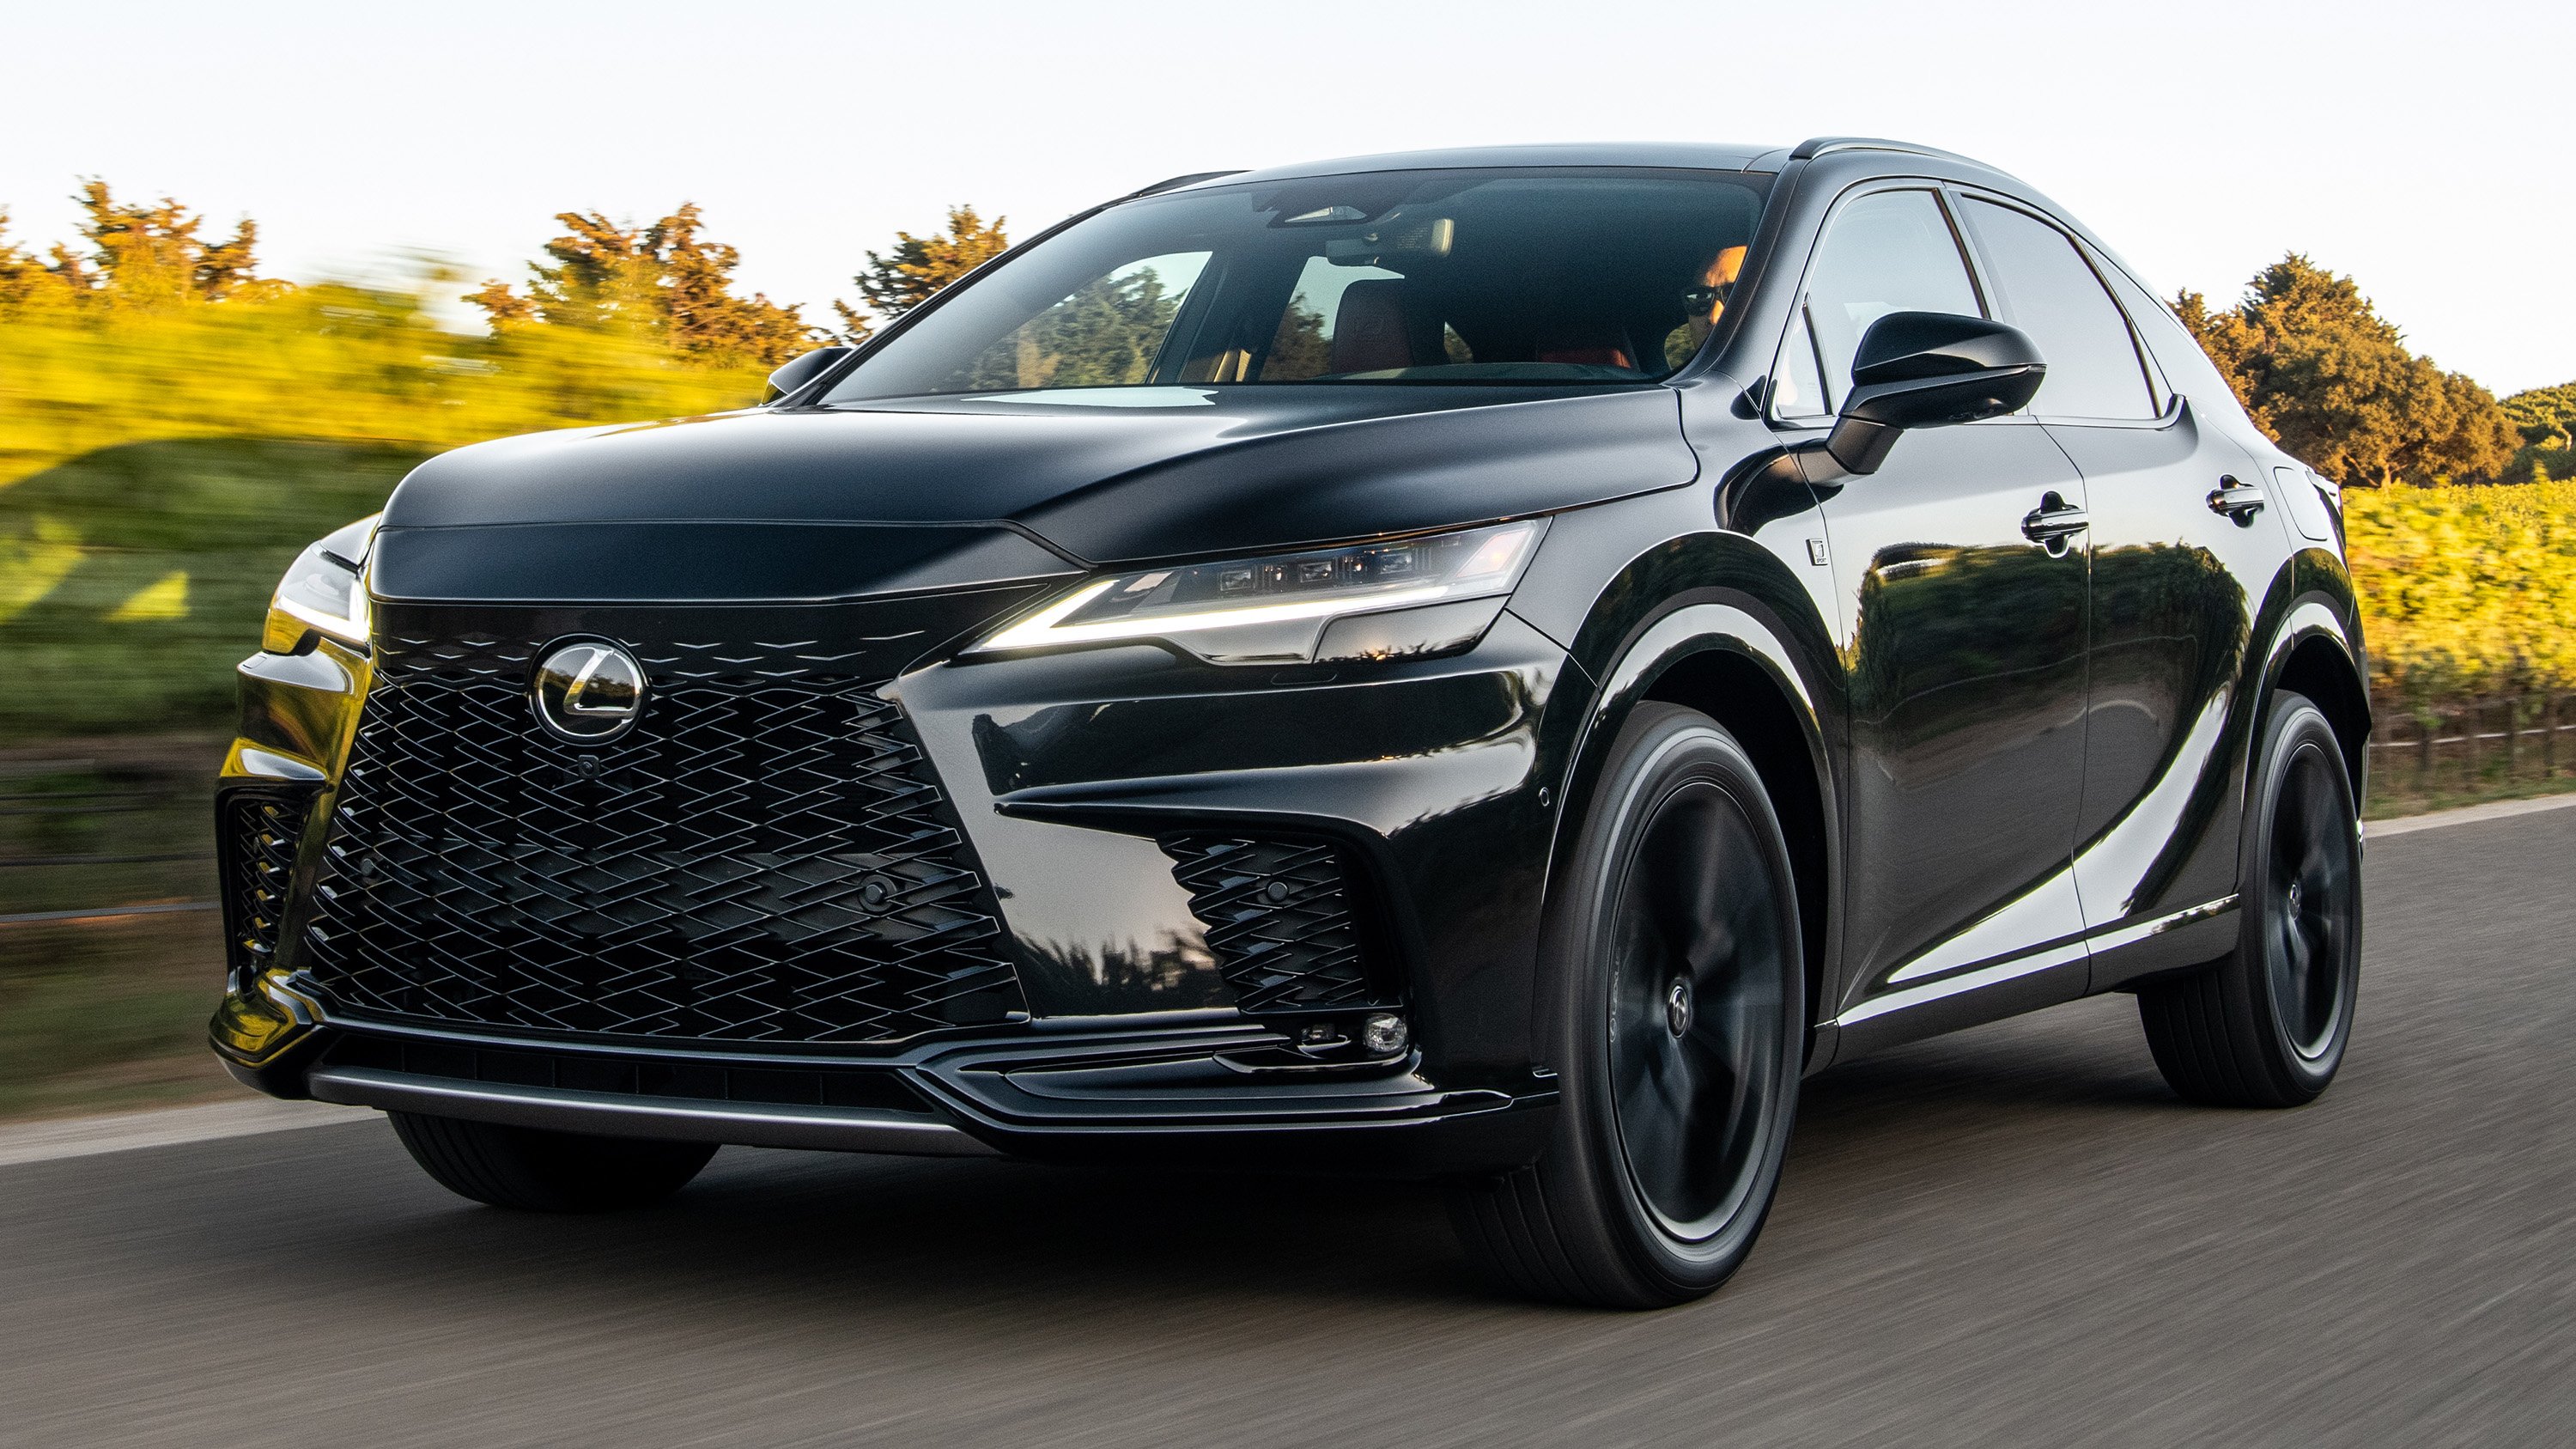 2023 Lexus RX500h F-Sport Review: Hybrid Performance SUV For The Long Haul